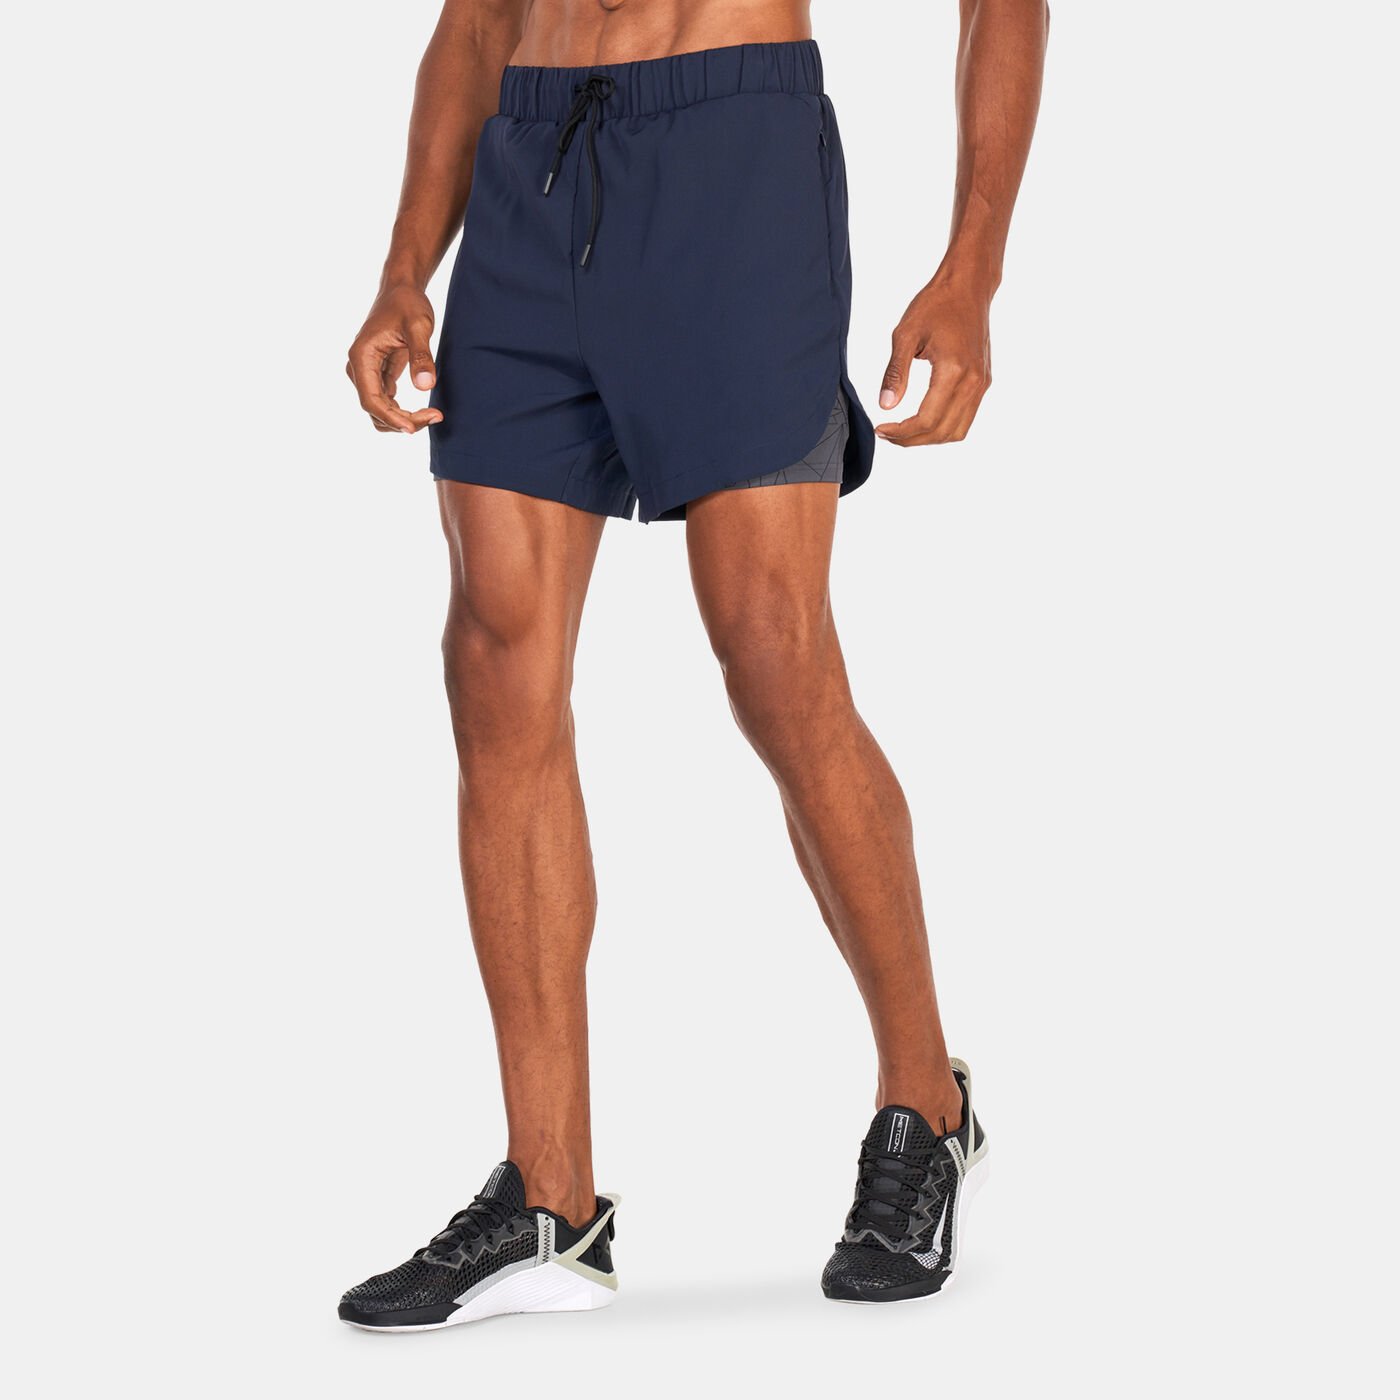 Men's Limitless 2-in-1 Training Shorts